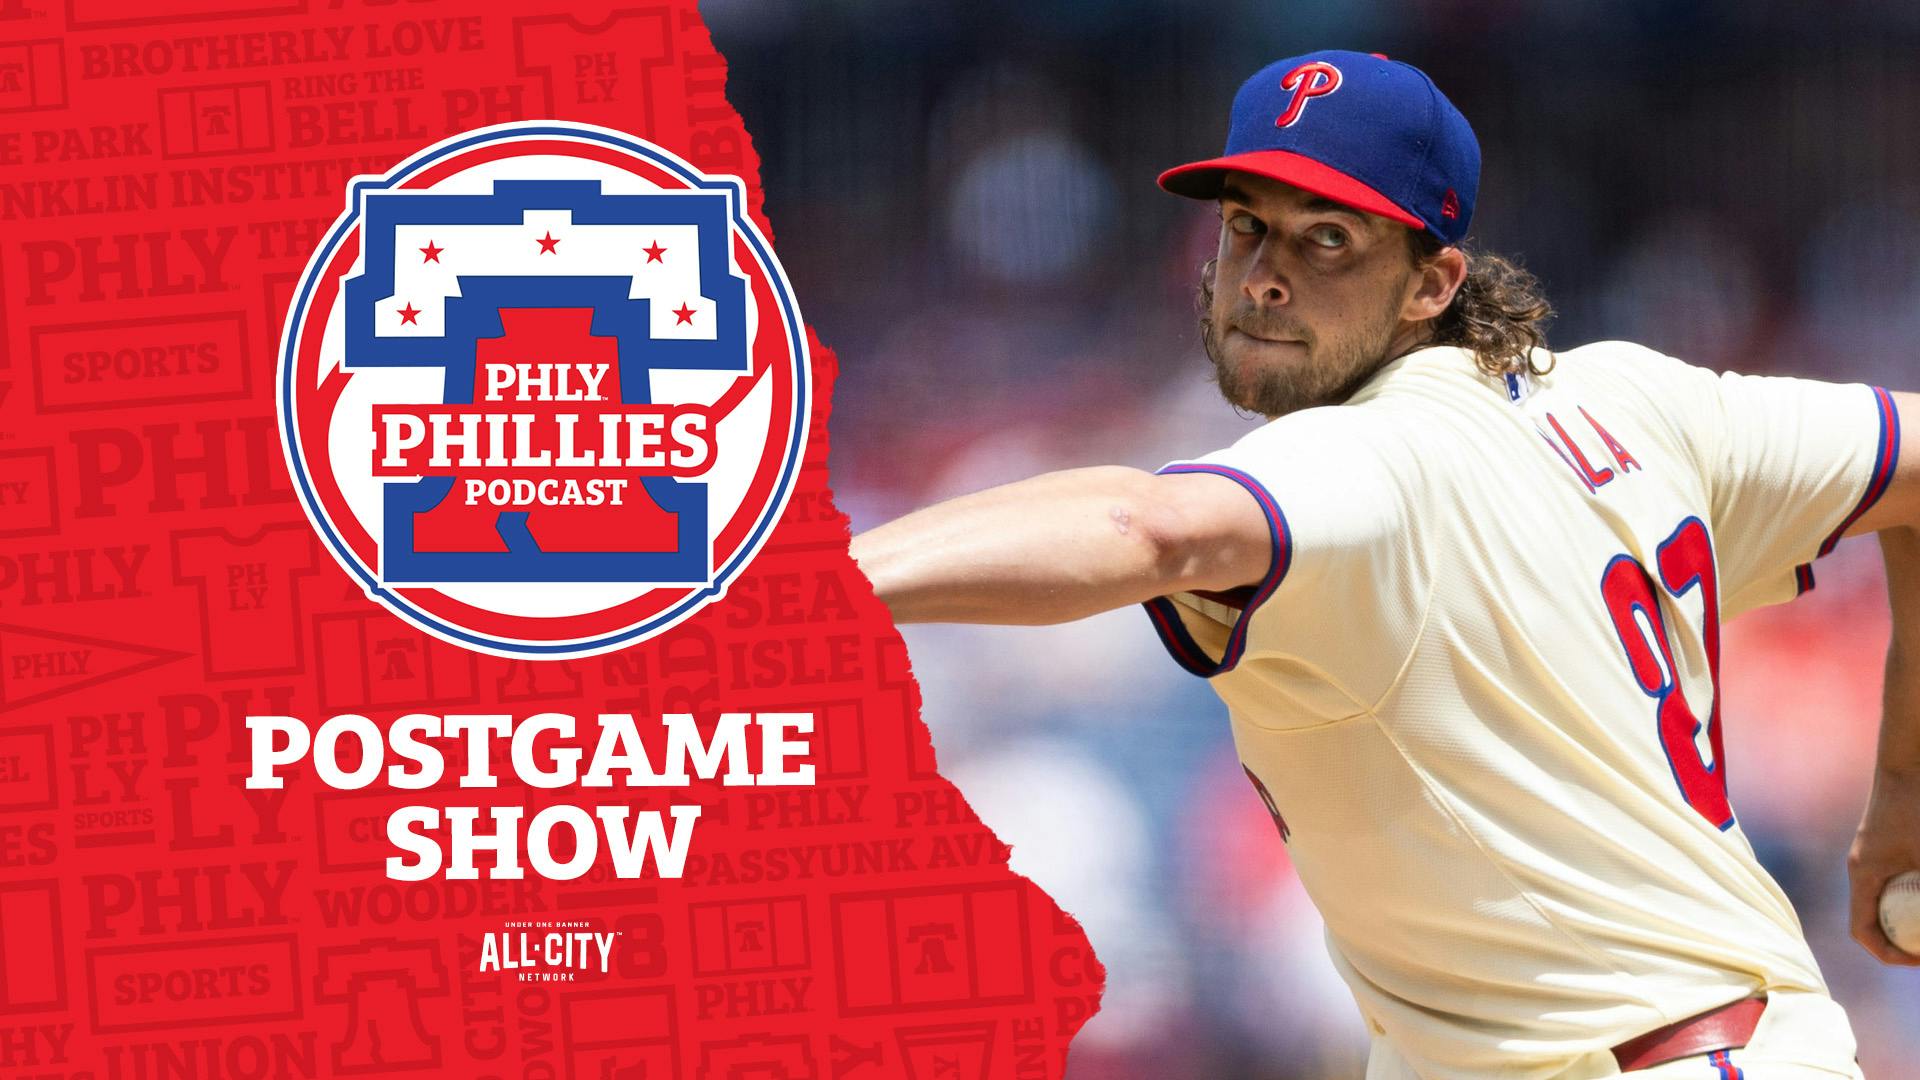 PHLY Phillies Podcast | Aaron Nola, Phillies drop game 2 of series to Toronto Blue Jays, home winning streak ends at 11